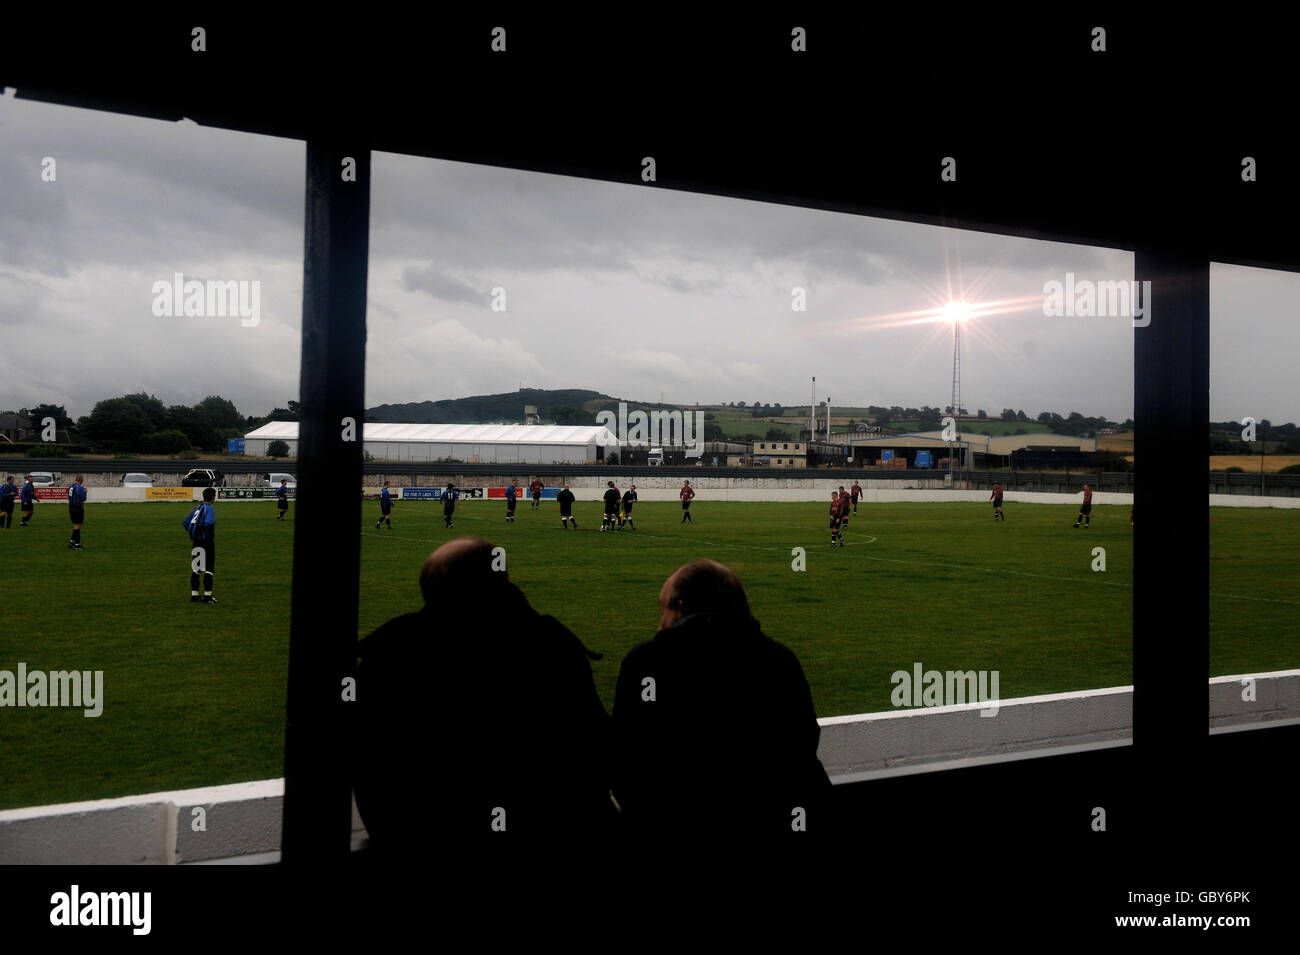 Soccer - West Auckland FC feature - Darlington Road Ground. Spectators watch the action between West Auckland and Stokesley at the Darlington Road Ground, West Auckland. Stock Photo